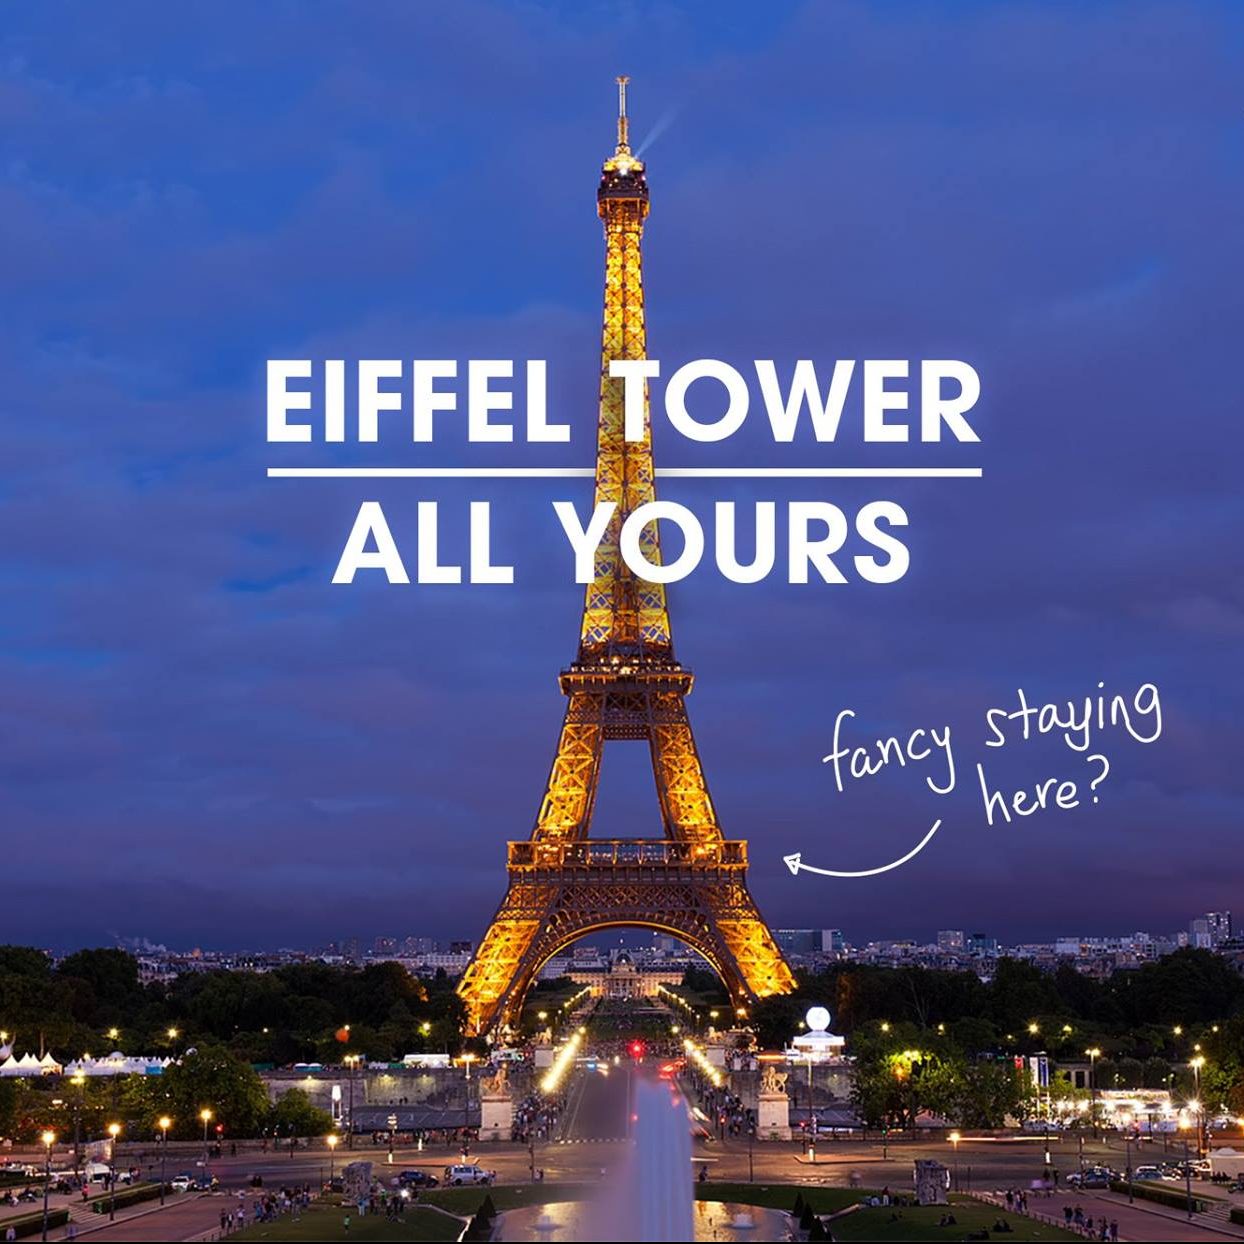 HomeAway Once-in-a-lifetime Opportunity Spend a Night at Eiffel Tower